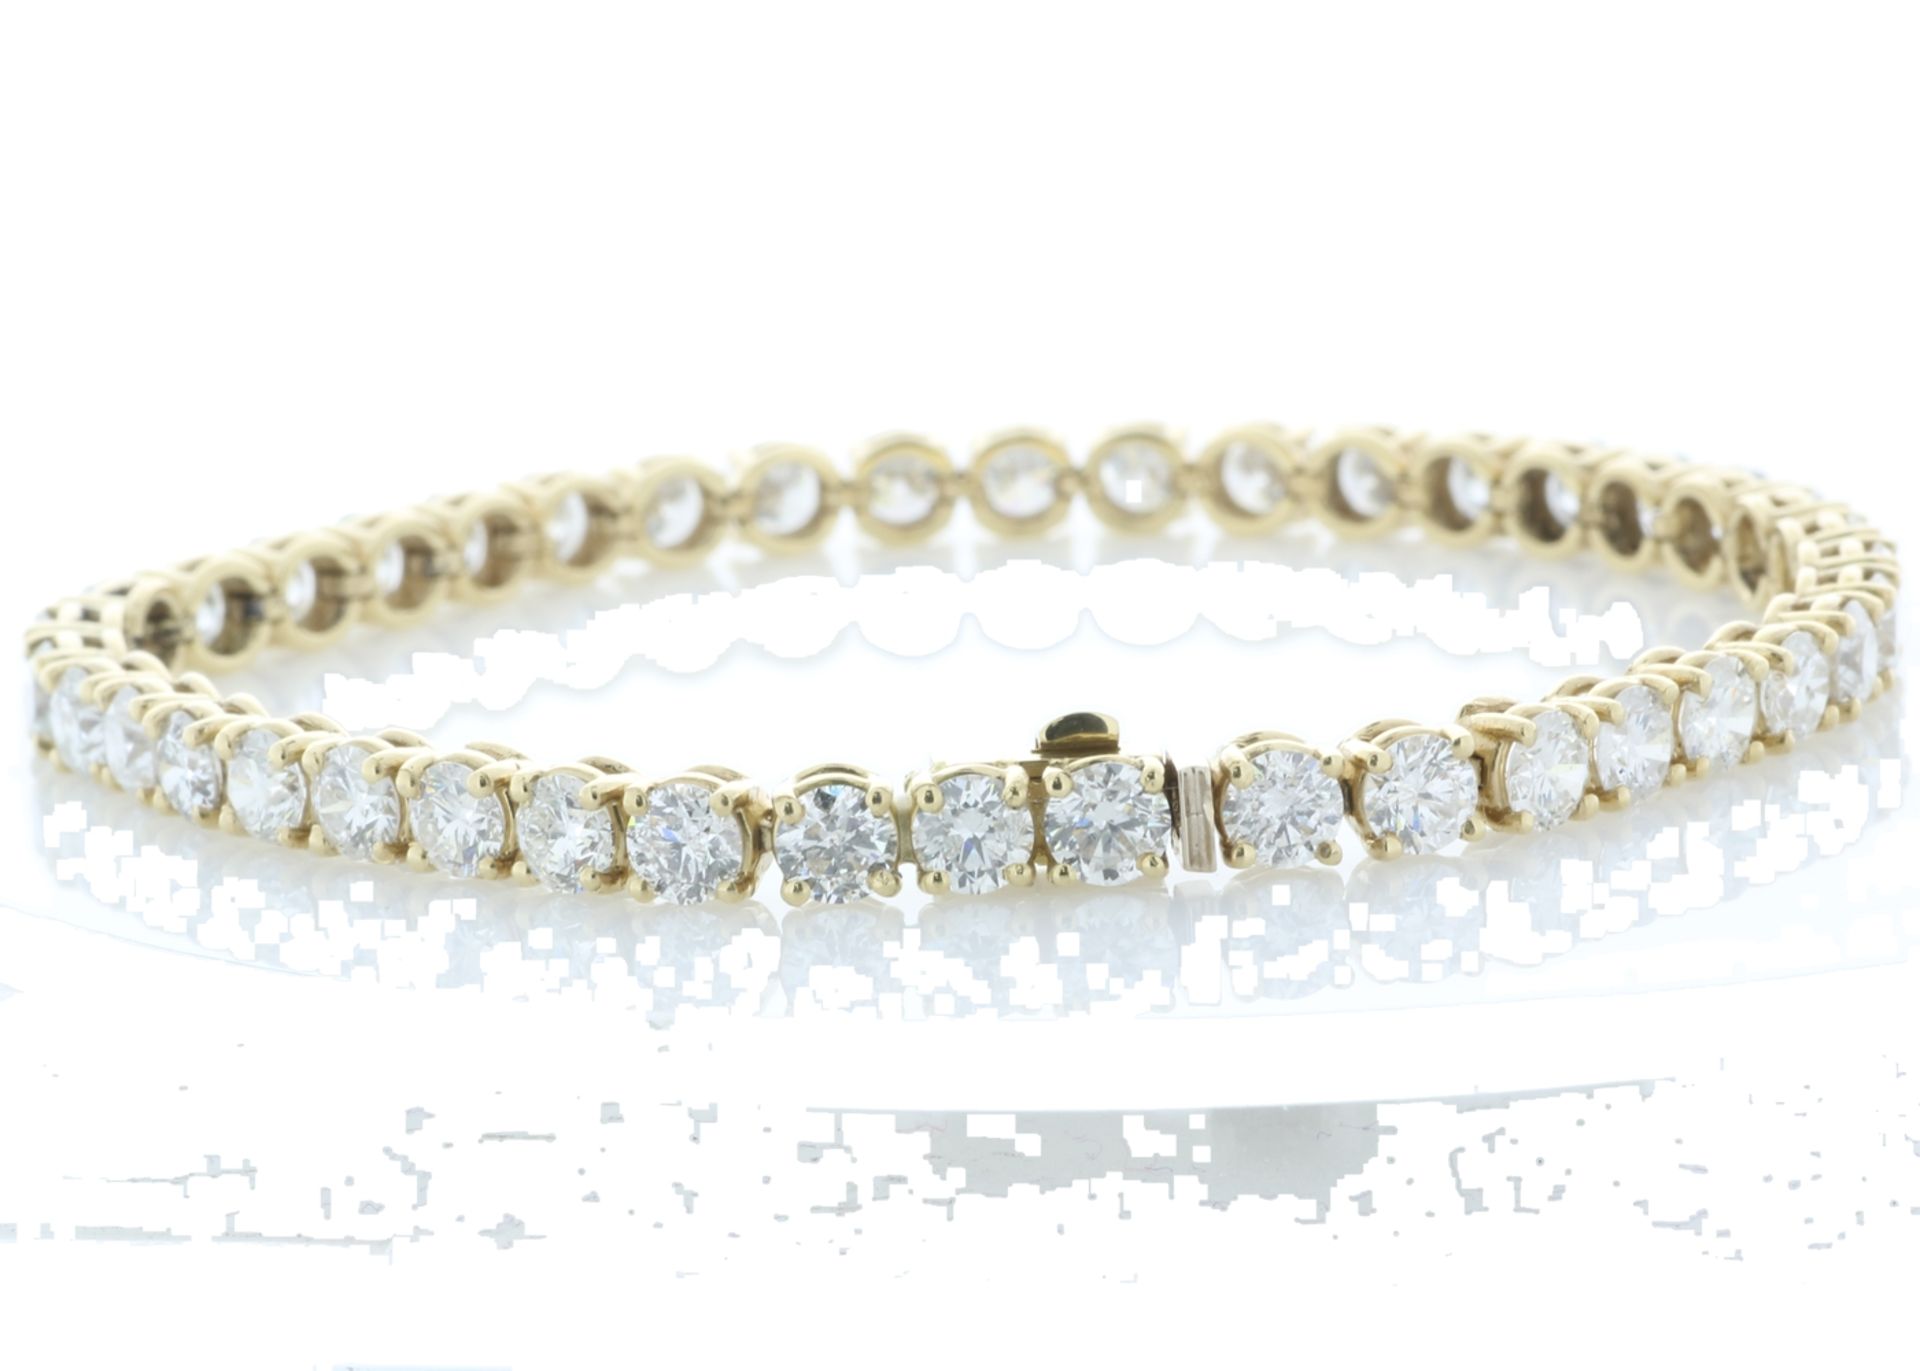 18ct Yellow Gold Tennis Diamond Bracelet 10.15 Carats - Valued by IDI £30,450.00 - 18ct Yellow - Image 2 of 5